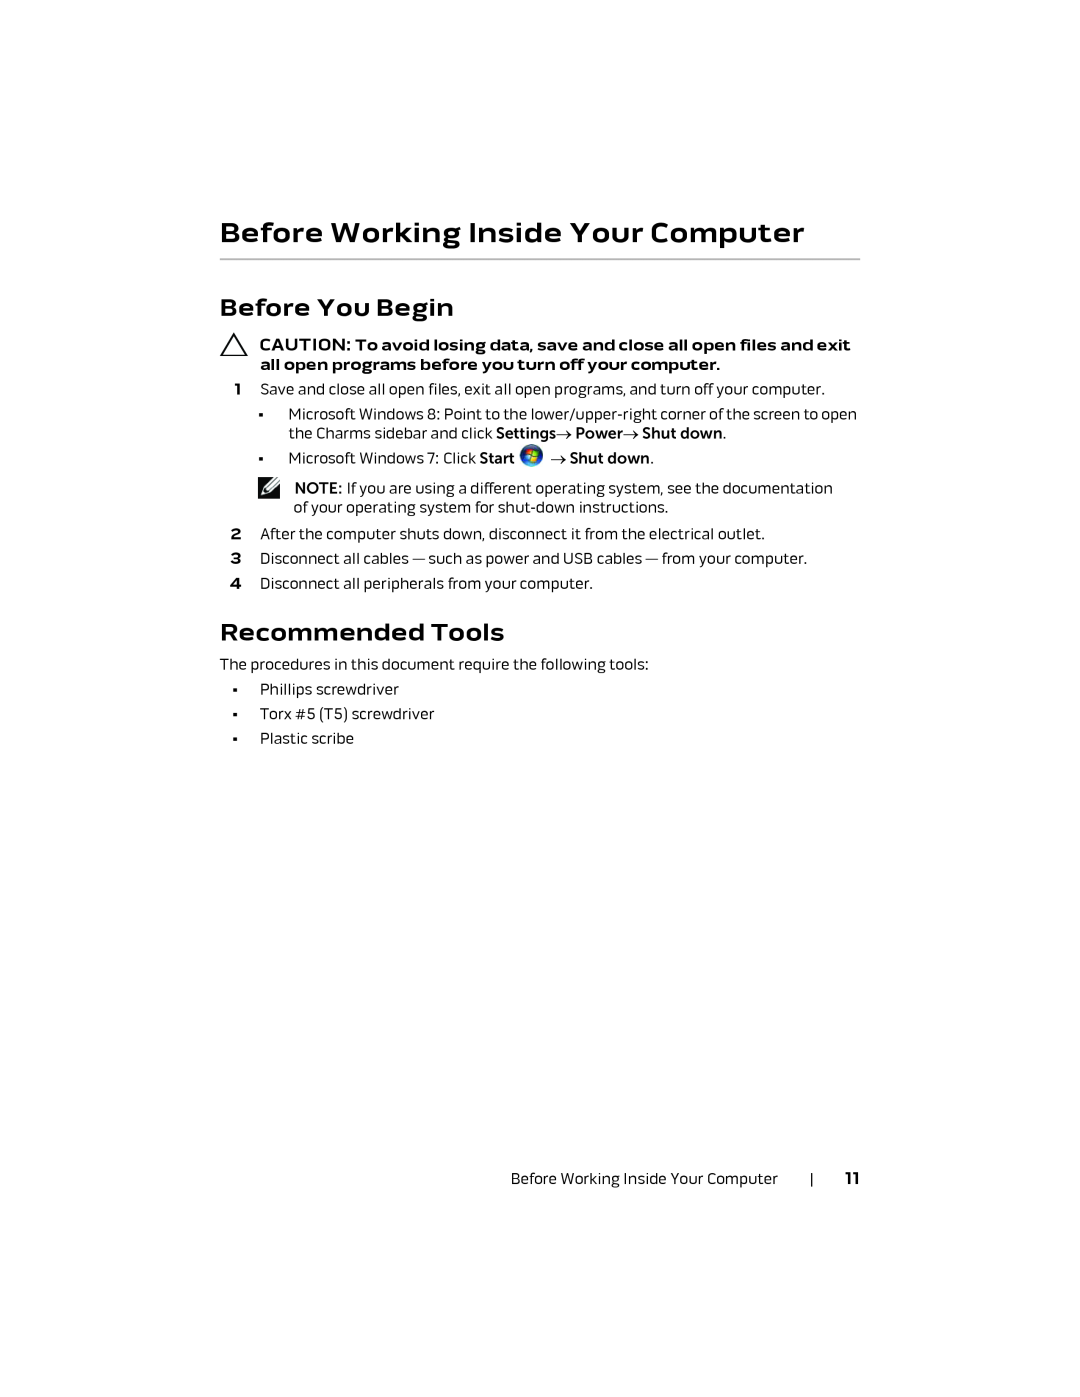 Alienware 17 R1, P18E owner manual Before Working Inside Your Computer, Before You Begin, Recommended Tools 